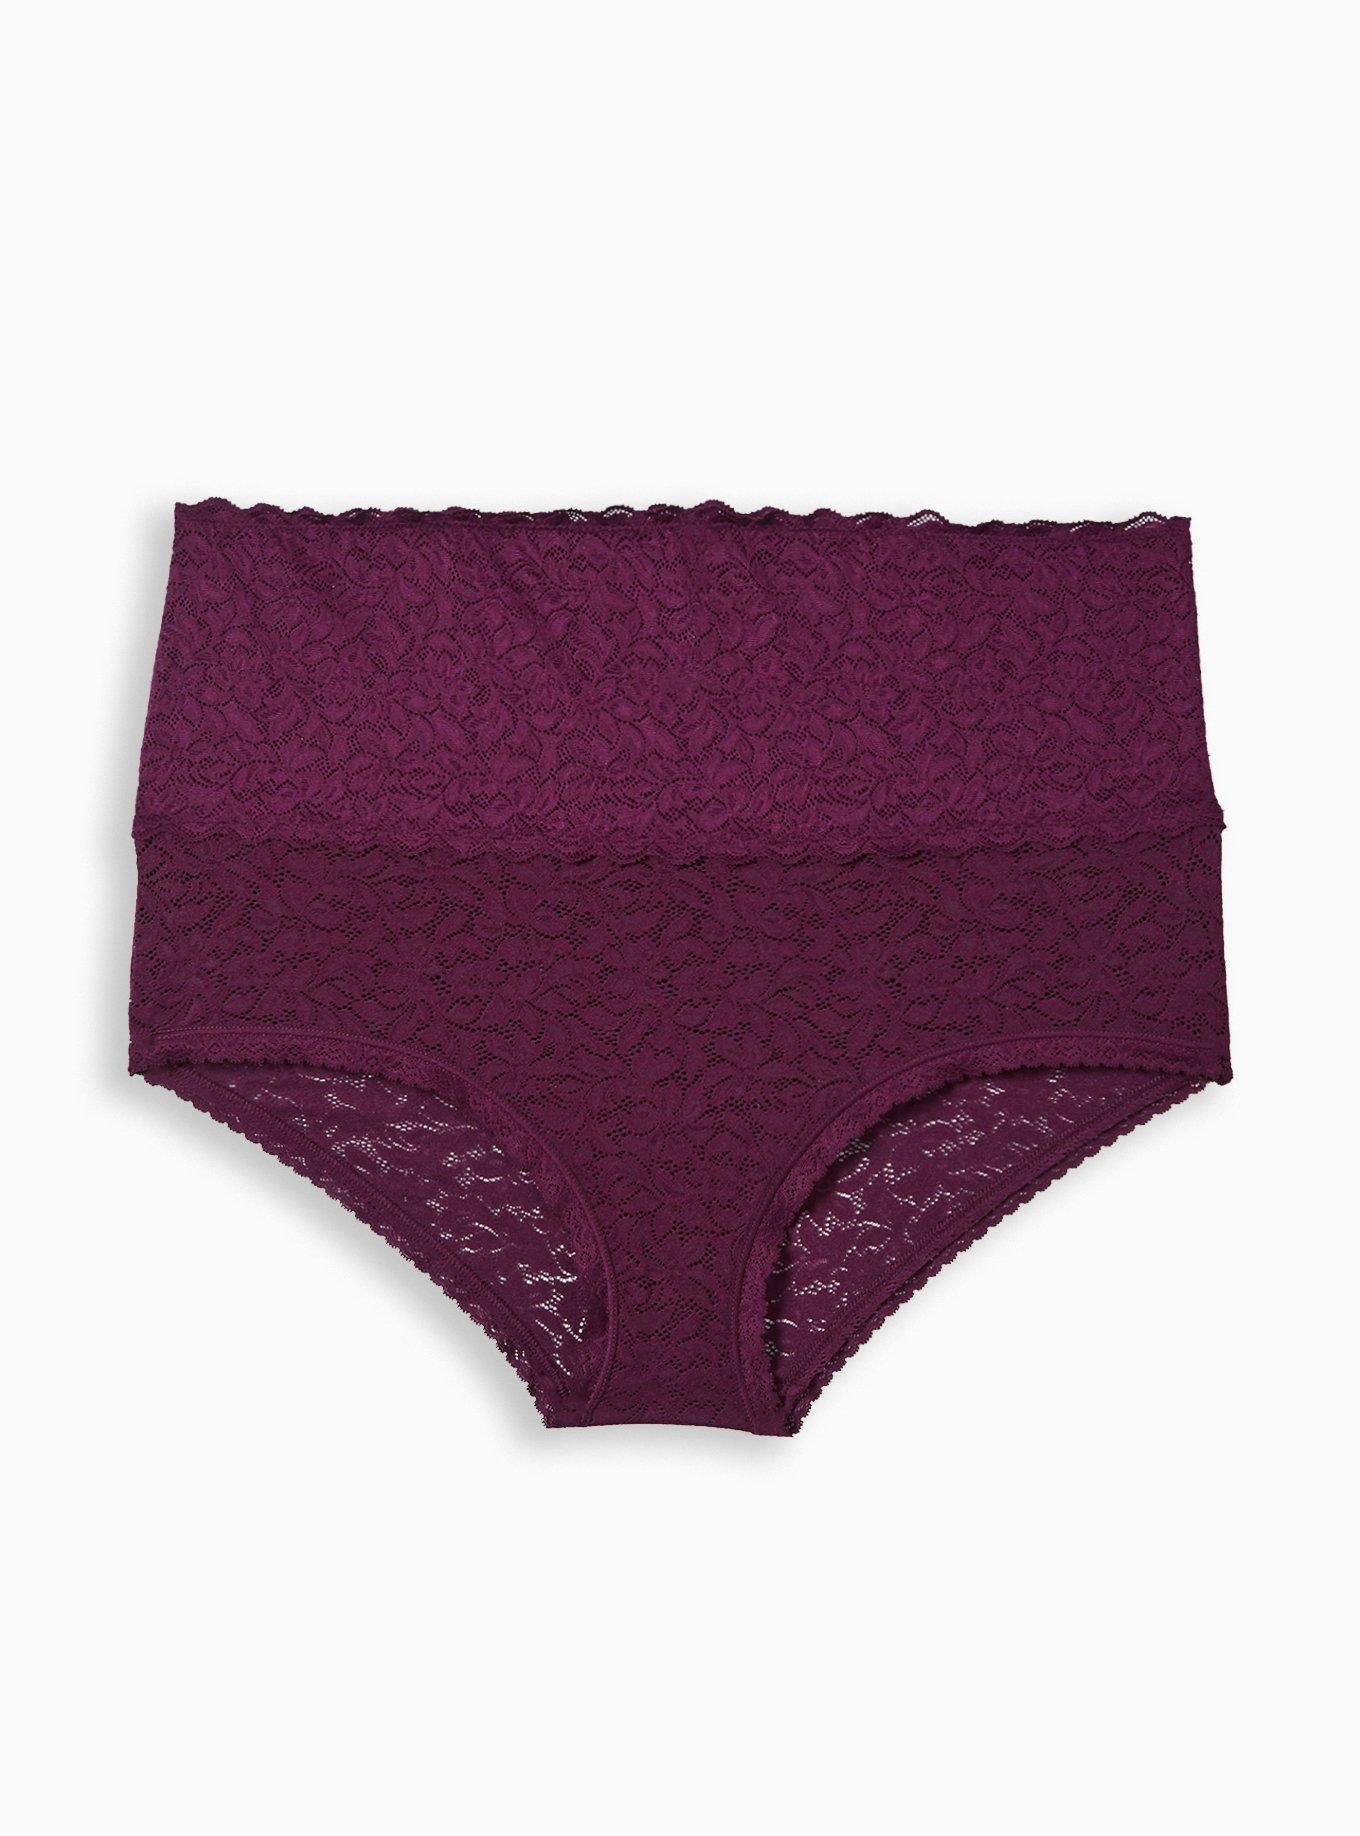 Plus Size - 4-Way Stretch Lace High-Rise Thong Panty - Torrid